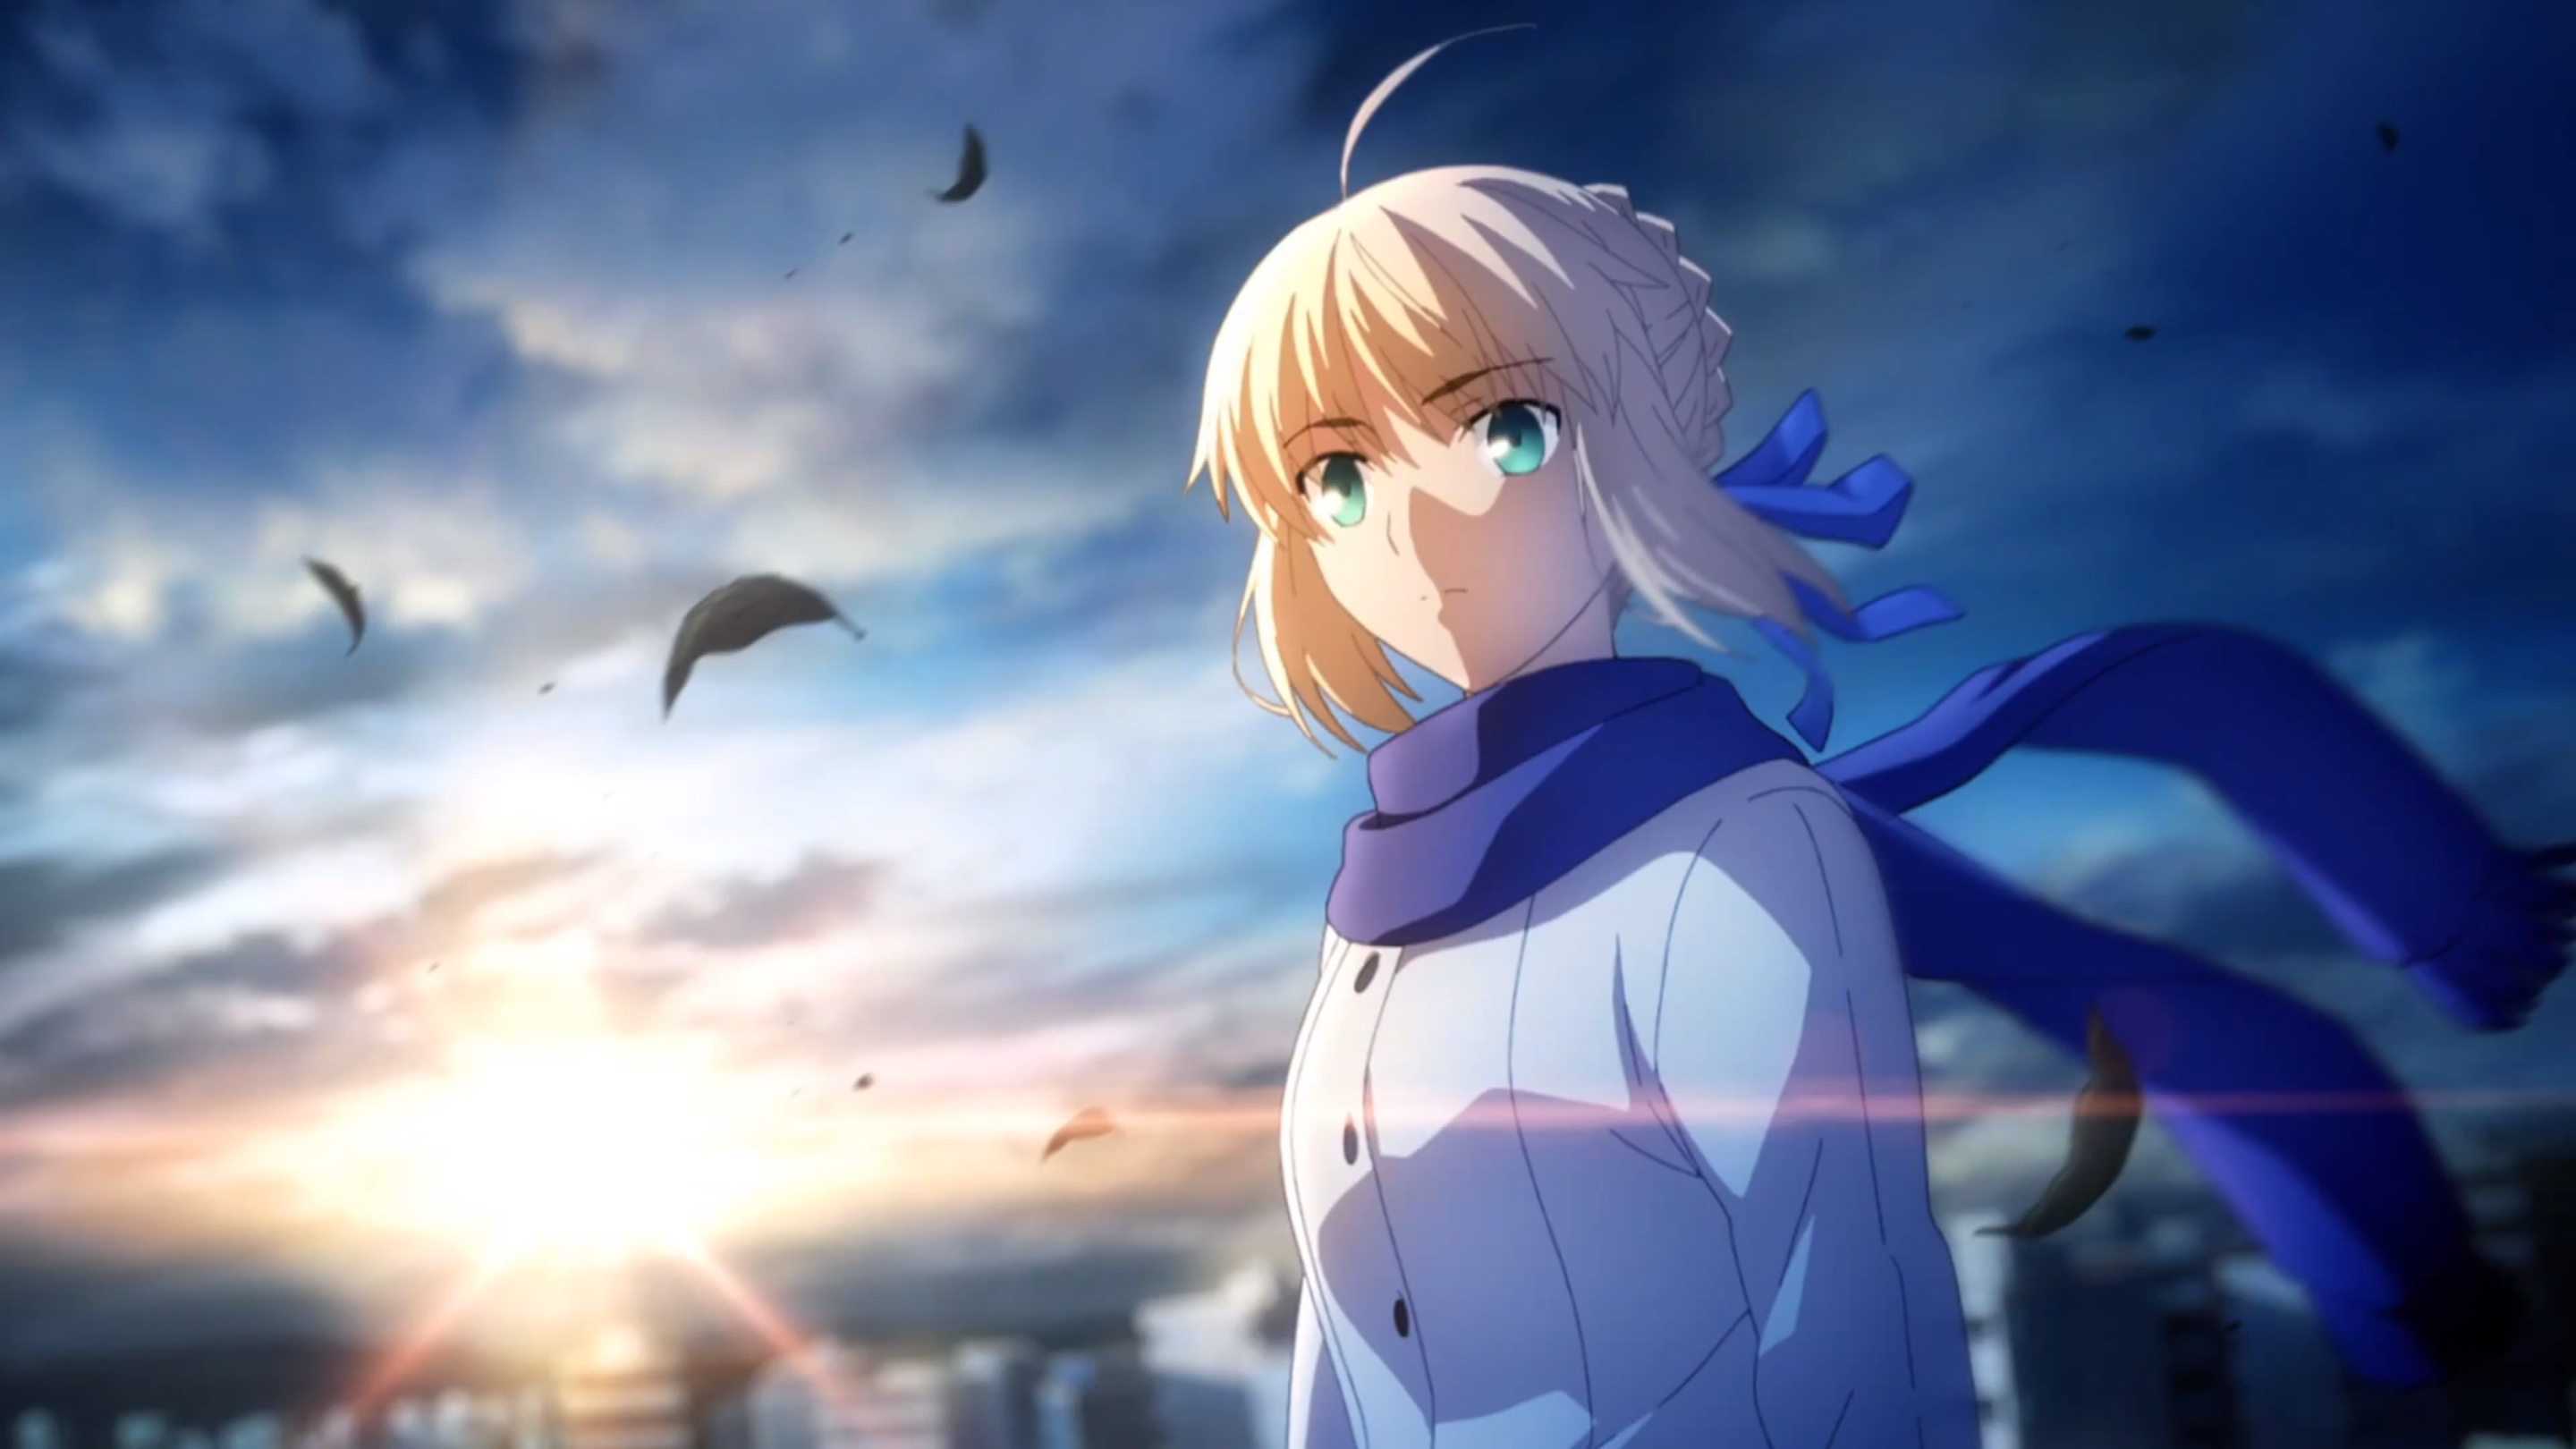 Fate/stay night, Unlimited Blade Works, HD wallpapers, Anime background, 2880x1620 HD Desktop